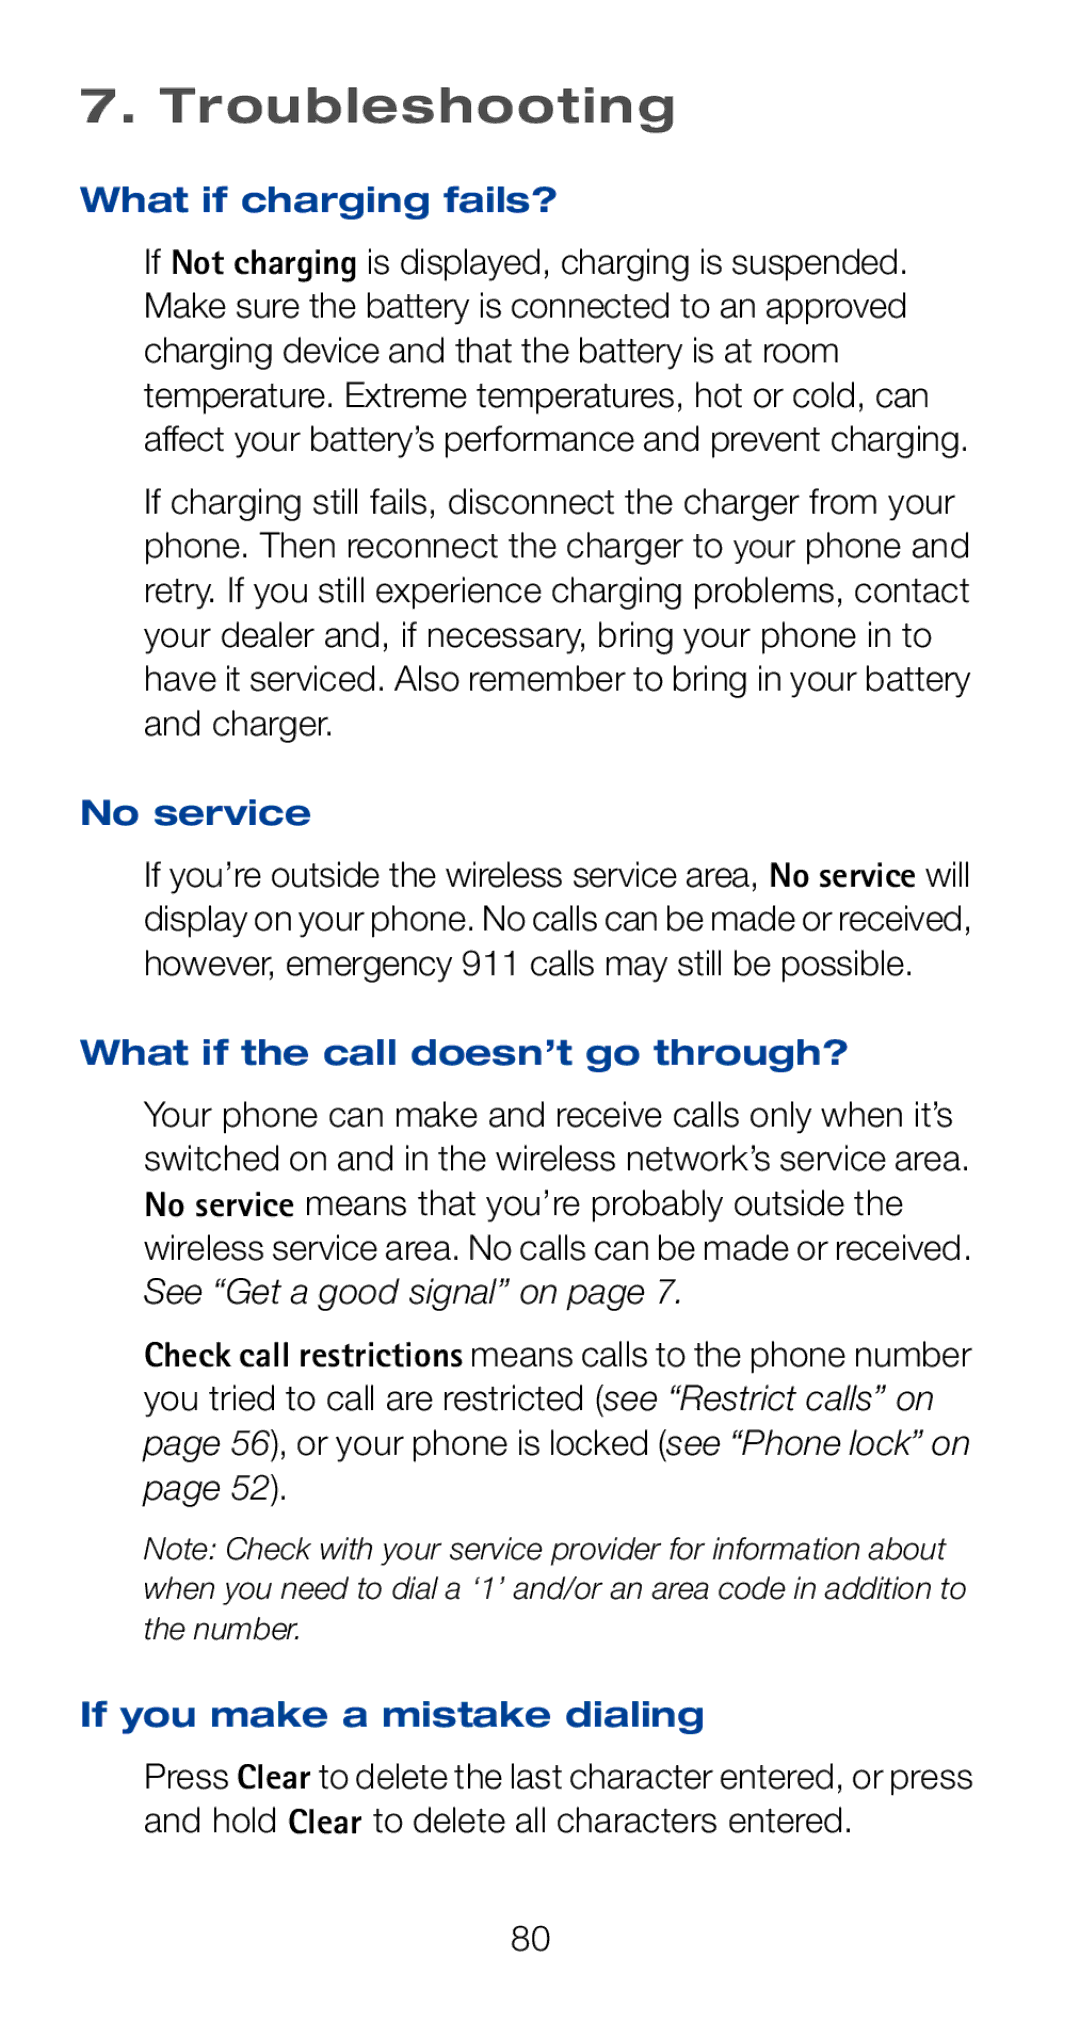 Nokia 6161i owner manual Troubleshooting, What if charging fails?, No service, What if the call doesn’t go through? 